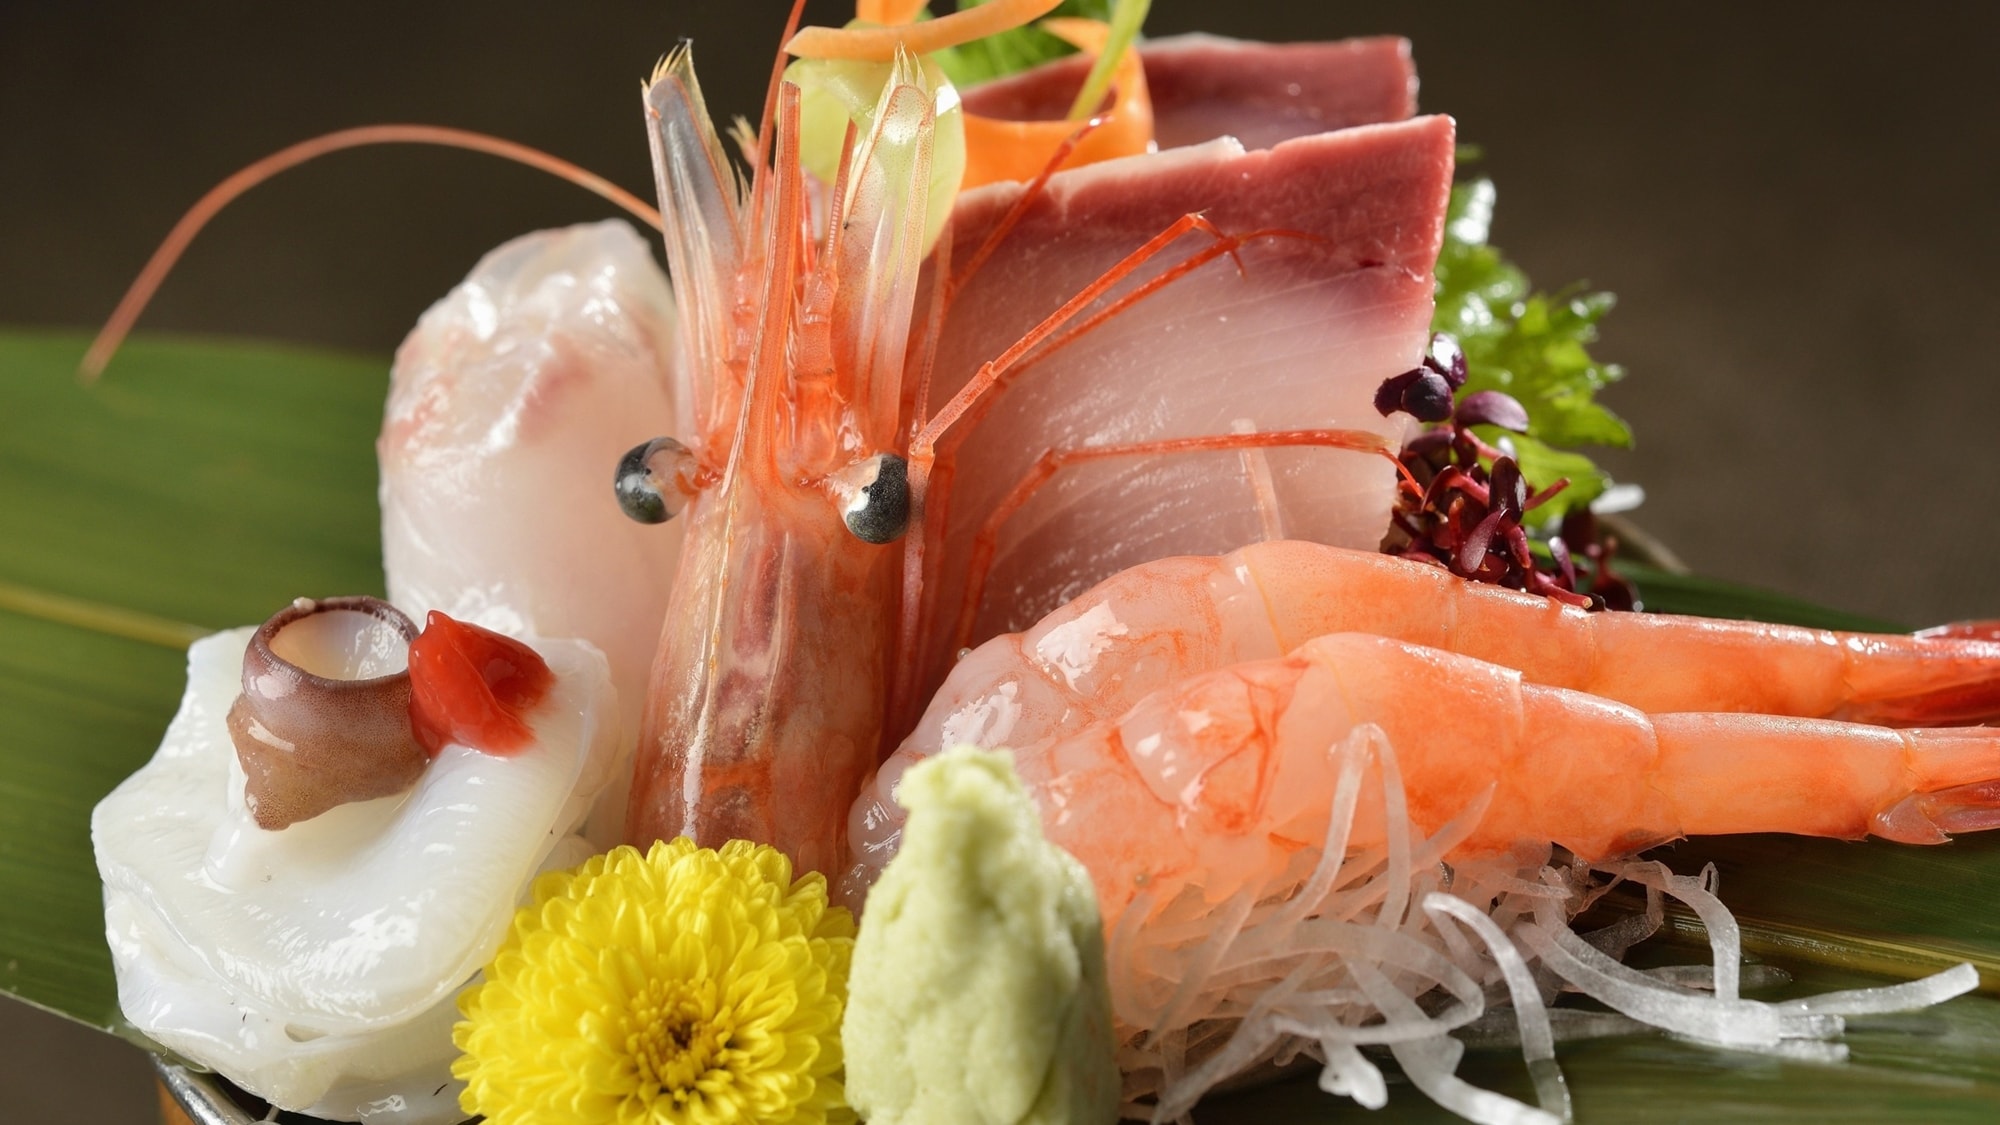 Uses seasonal ingredients with outstanding freshness! Shrimp such as Nanban shrimp